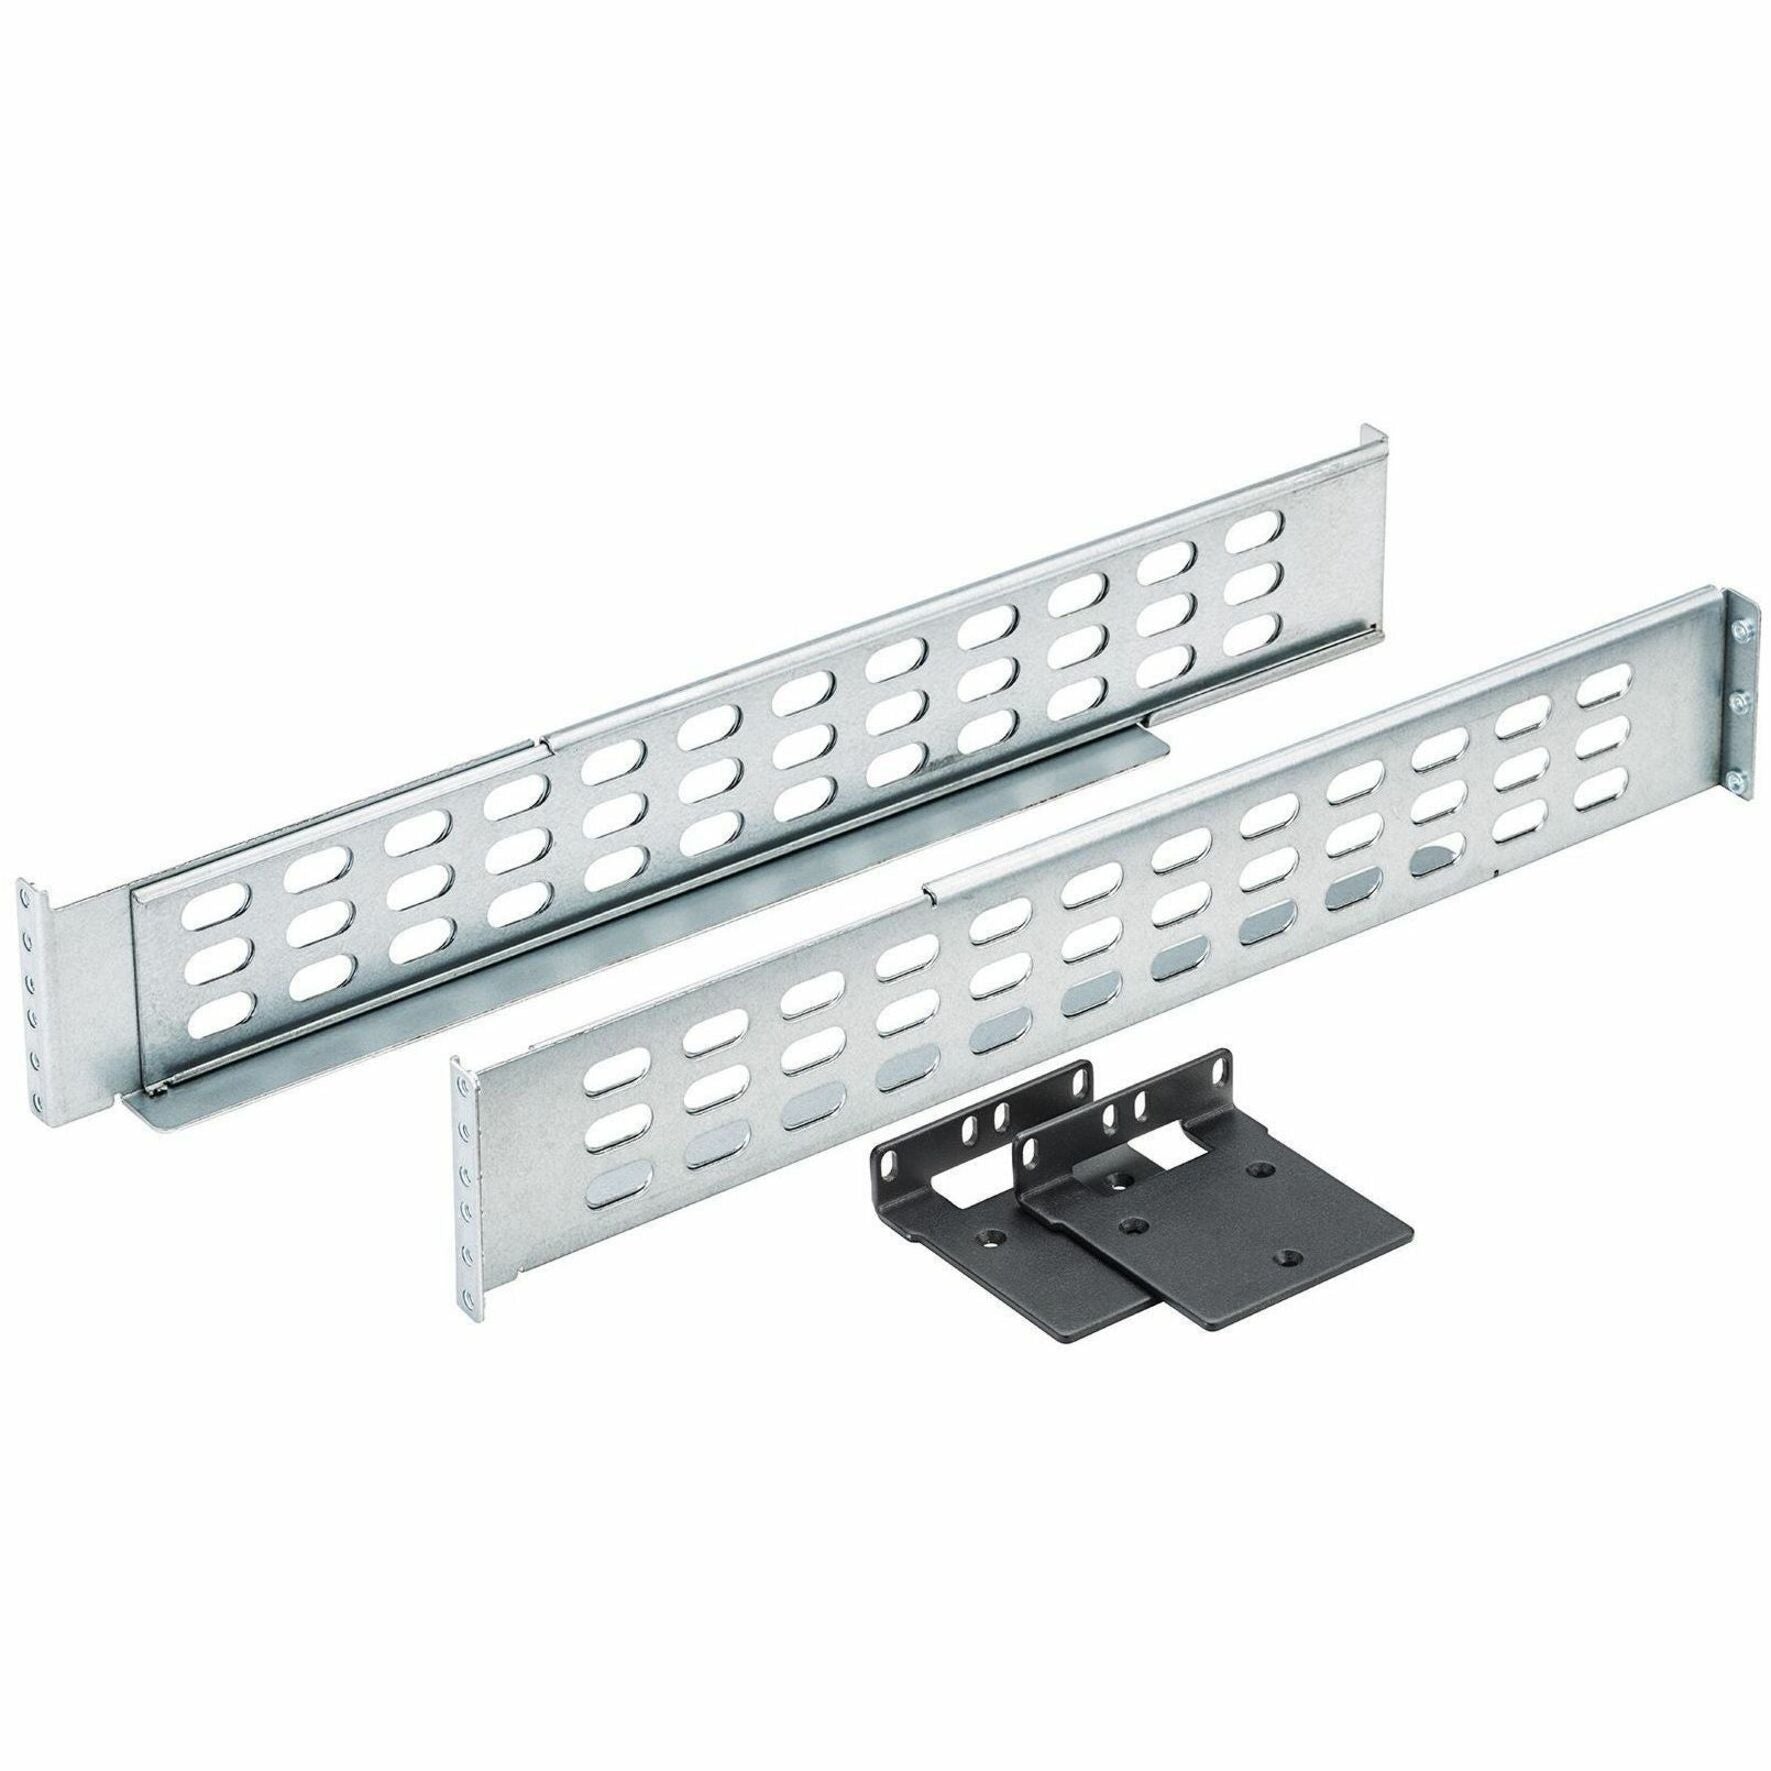 APC SRTRK4 Mounting Rail Kit for UPS, Easy Installation and Secure Mounting